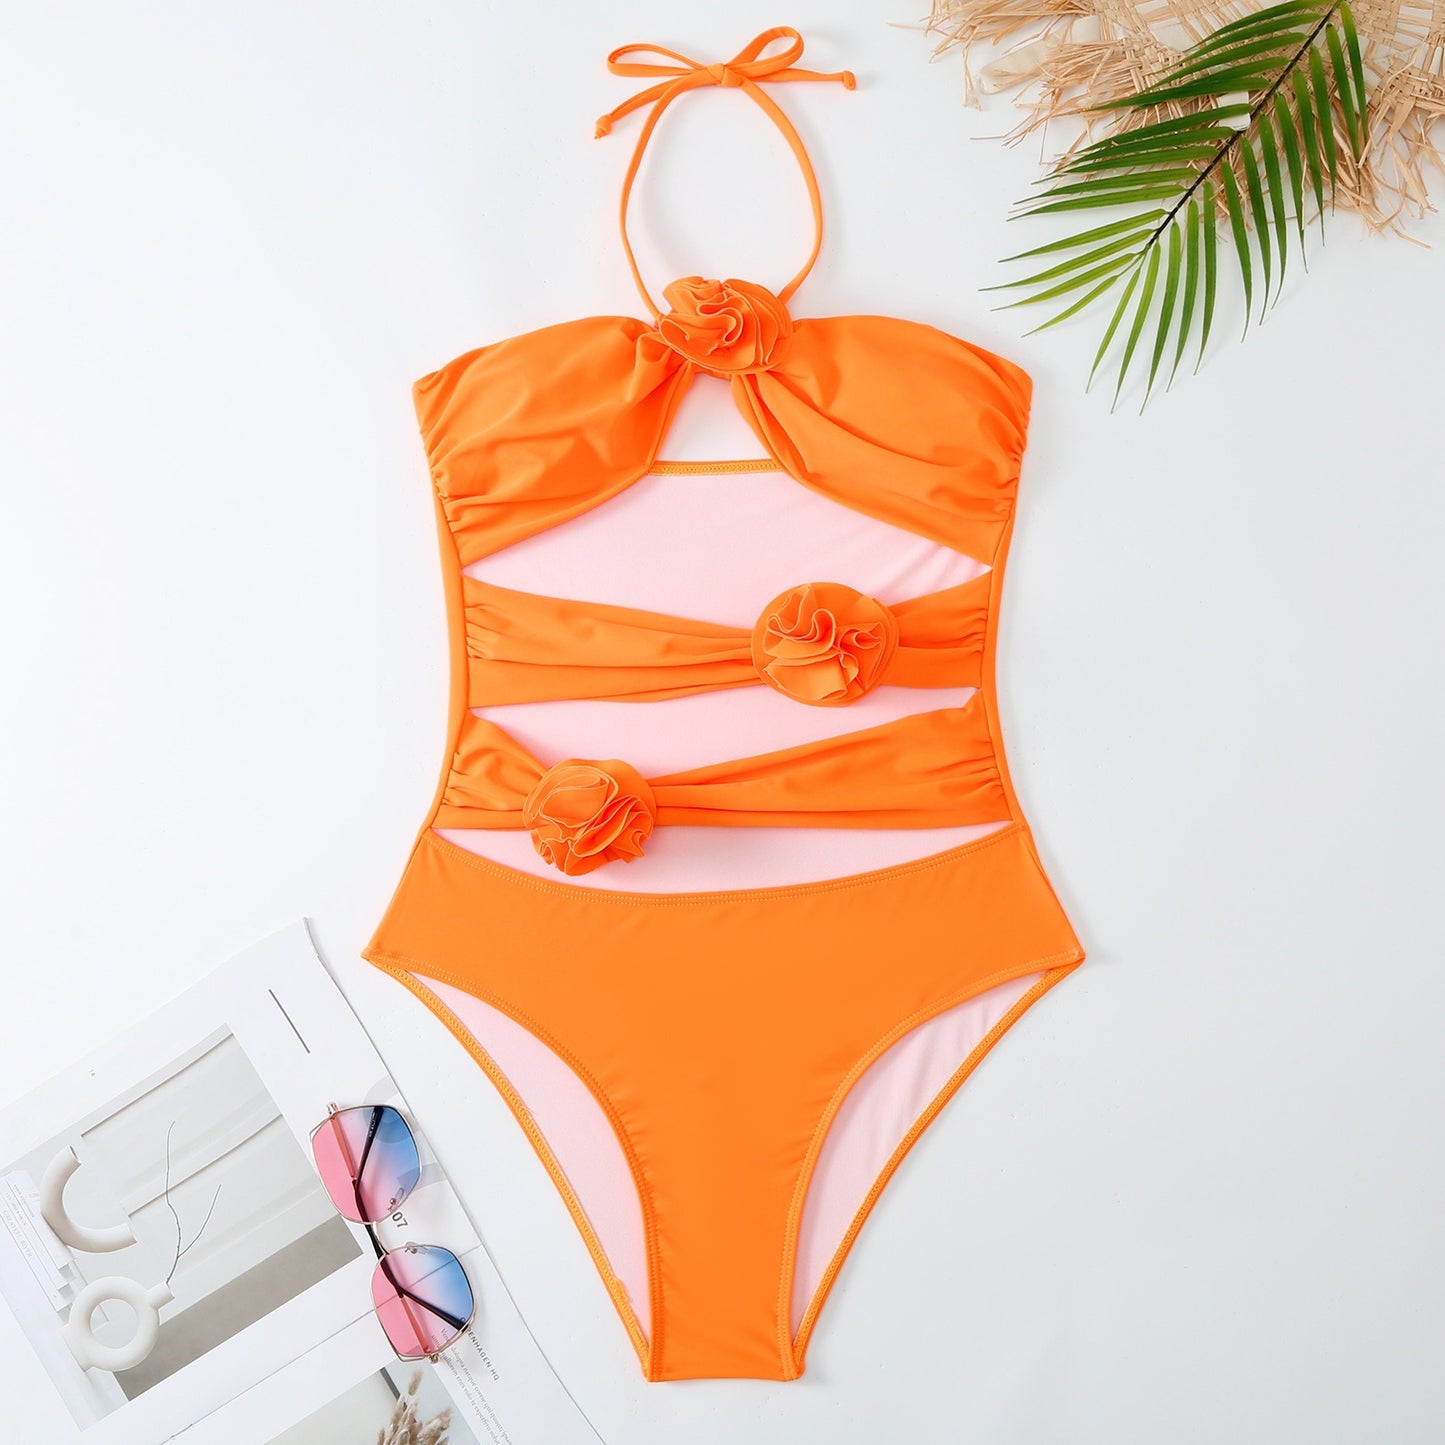 European and American One-Piece Conservative Belly Covering and Slimming Sexy Skirt Style New Swimsuit Women's Chiffon Beach Ski